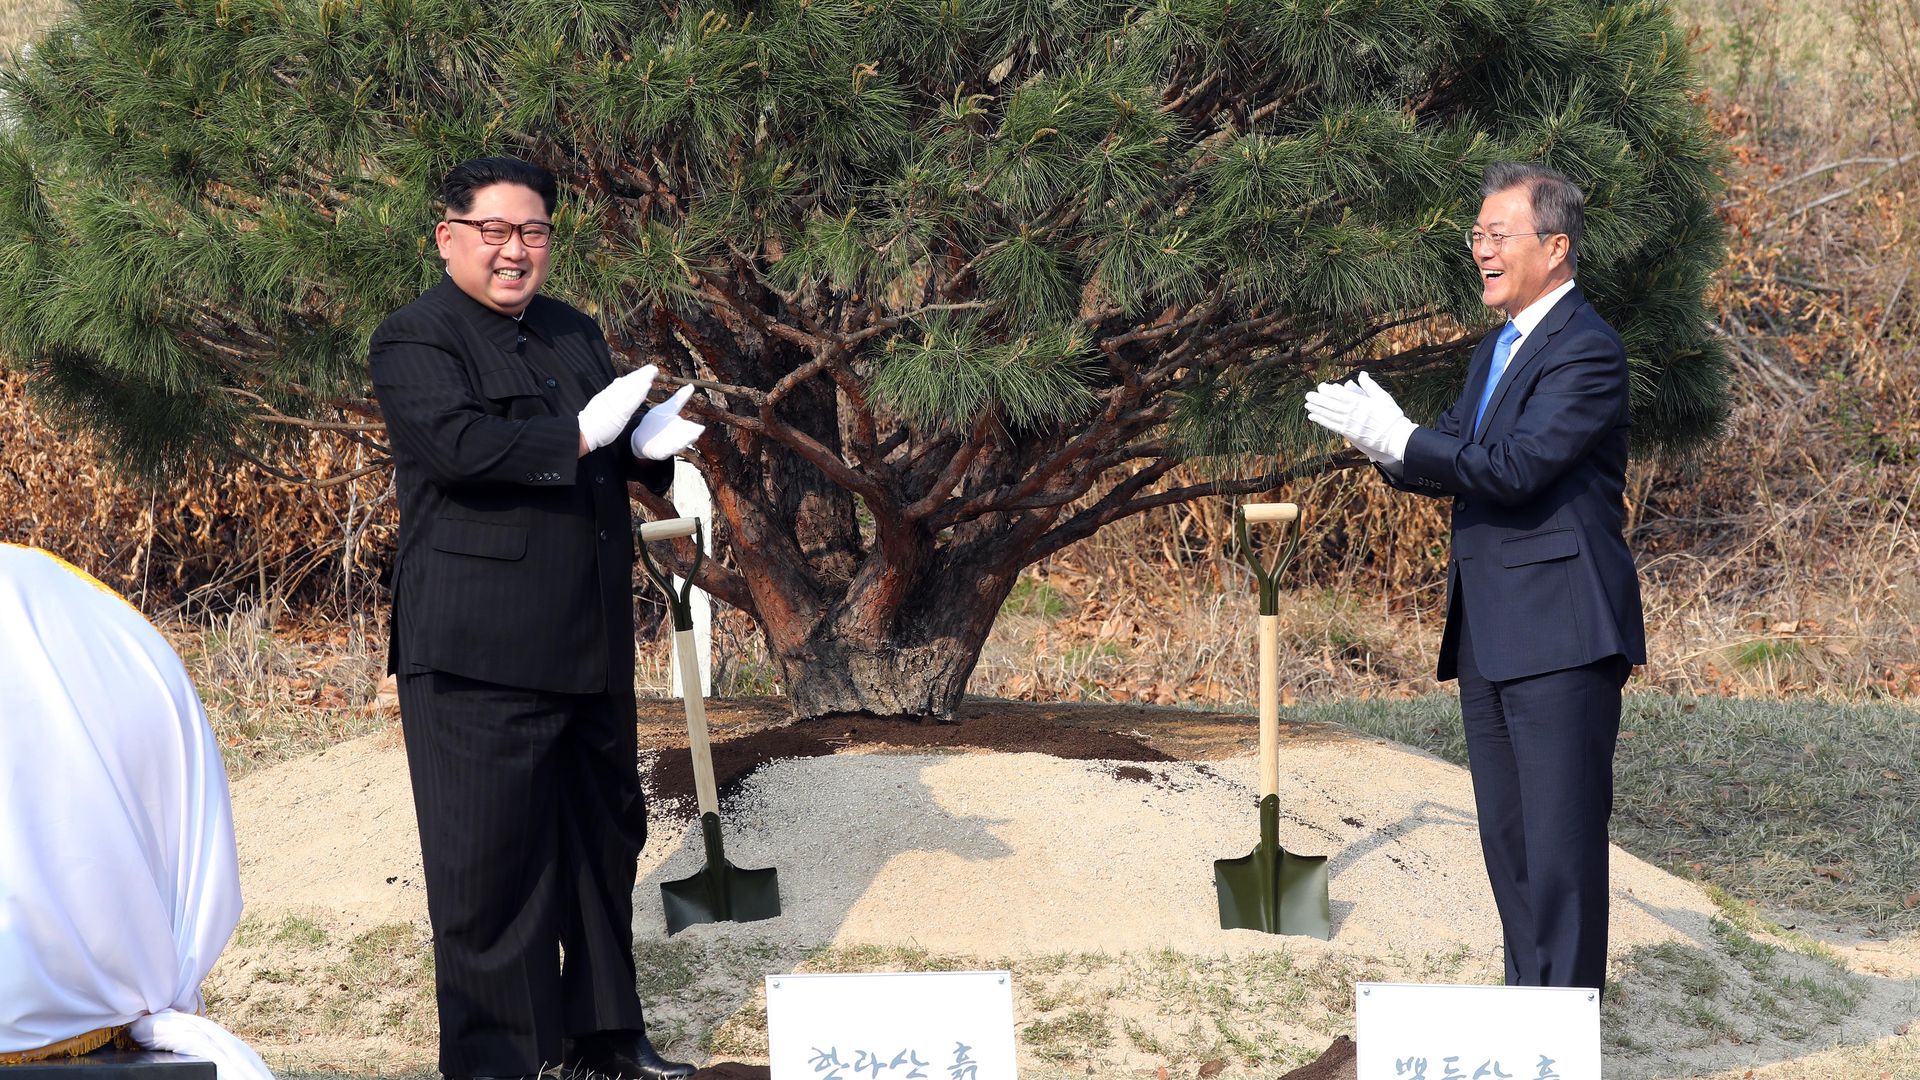 North Korean leader Kim Jong Un and South Korean President Moon Jae-in at a tree planting ceremony during the Inter-Korean Summit on April 27, 2018 in Panmunjom, South Korea.